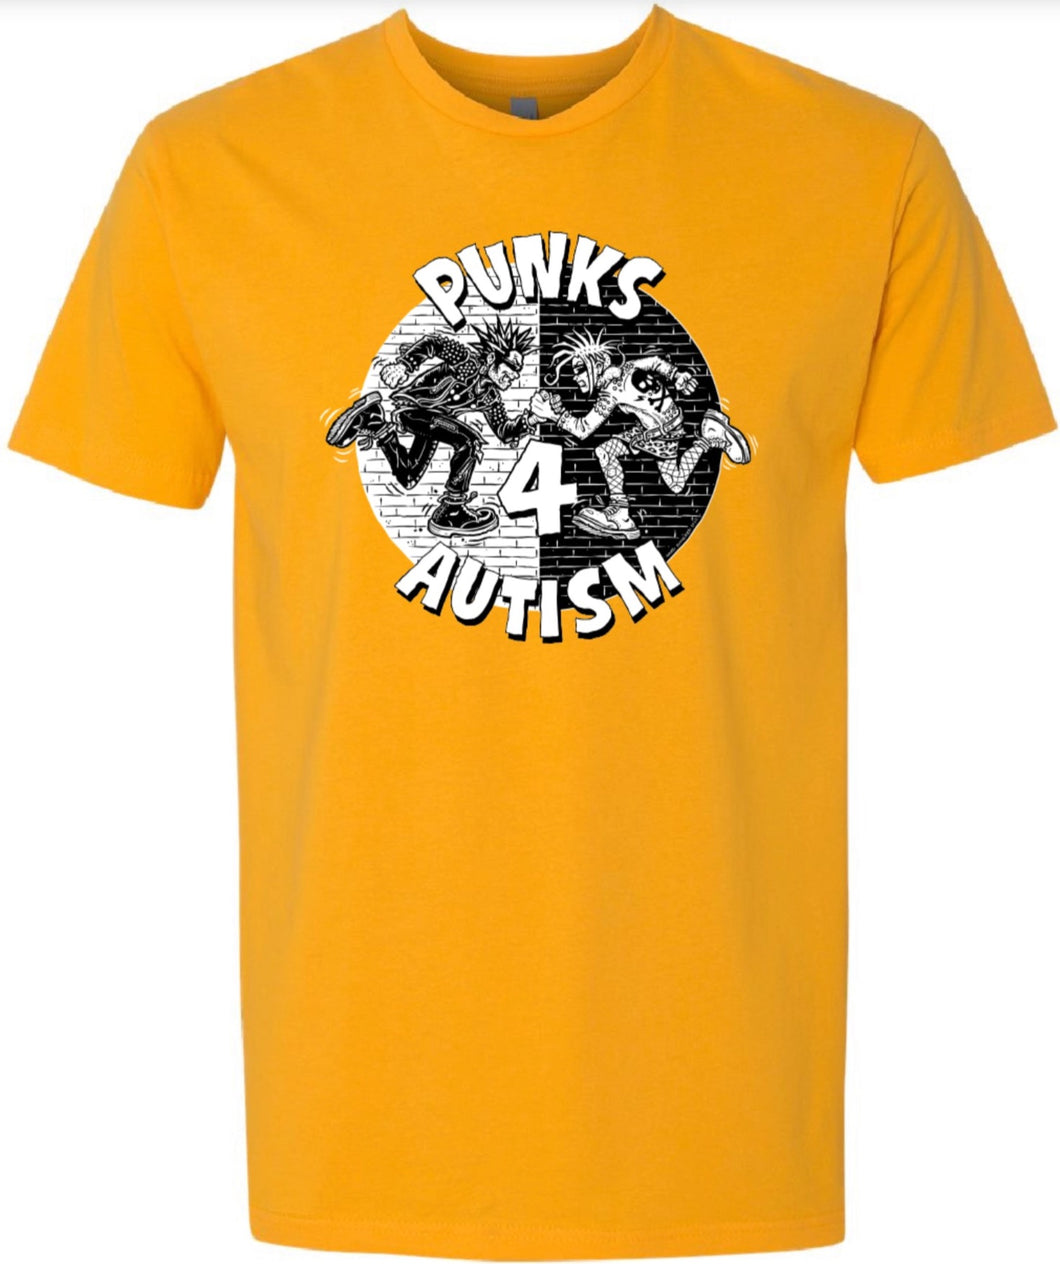 Punks for Autism - Two Tone - Short Sleeve